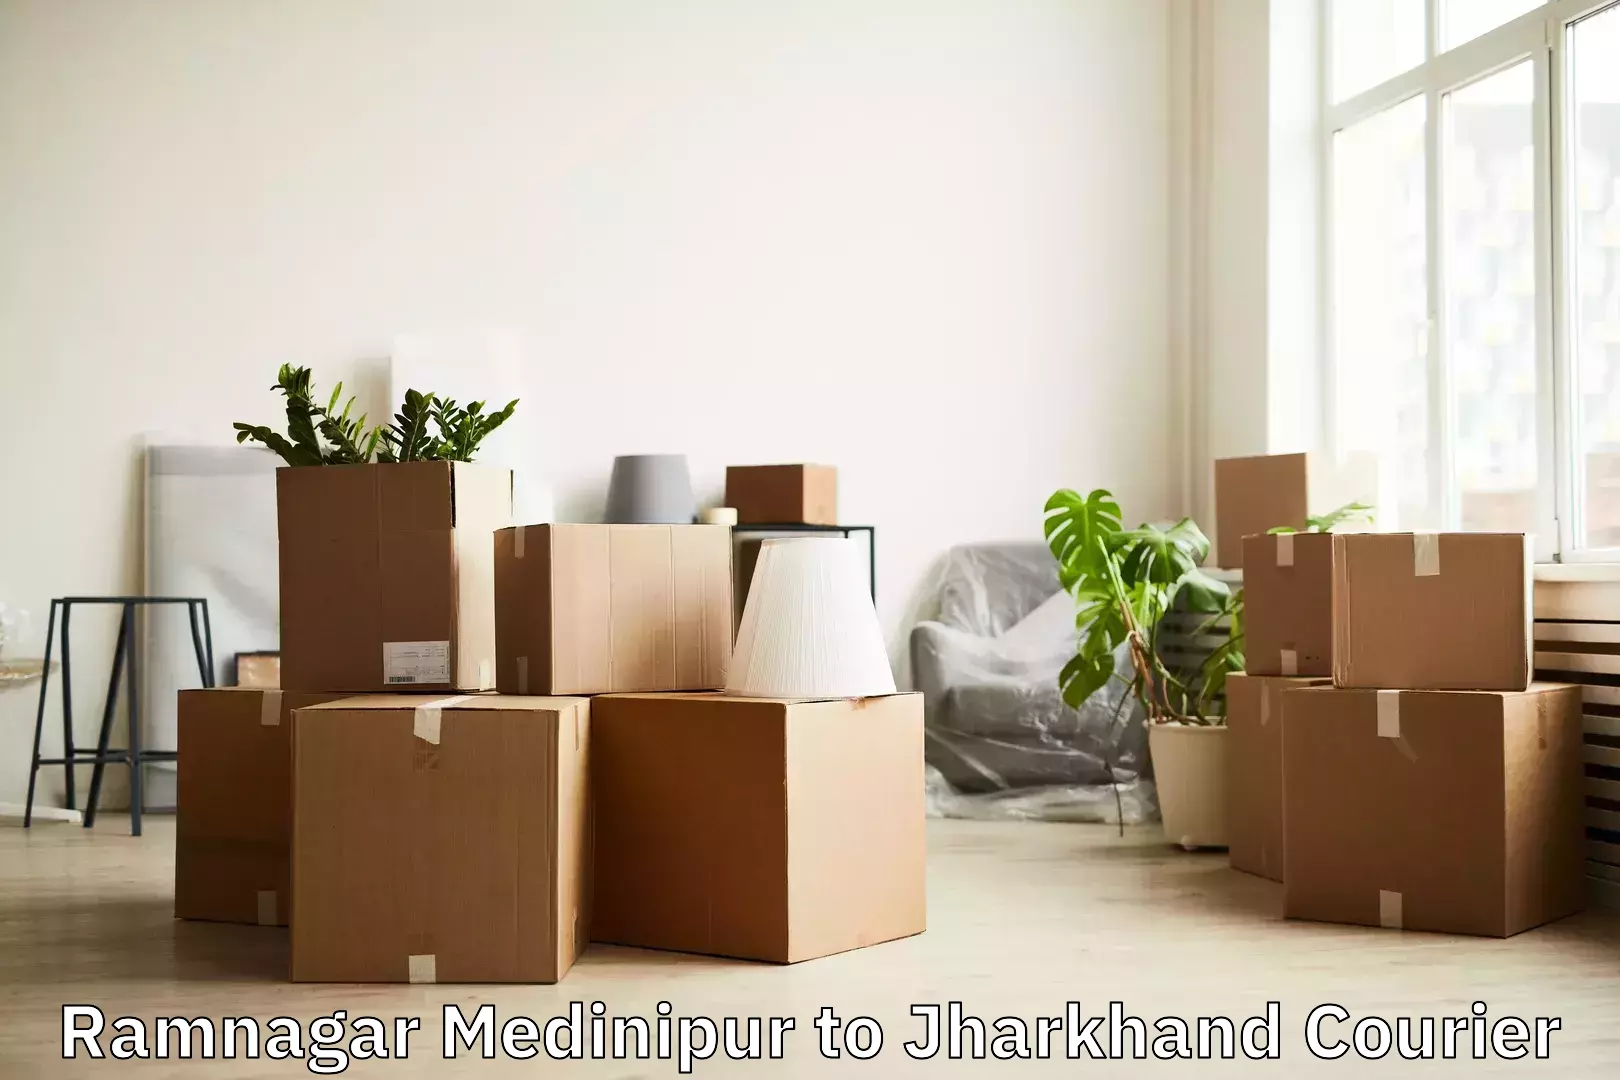 Expedited baggage courier Ramnagar Medinipur to Jharia